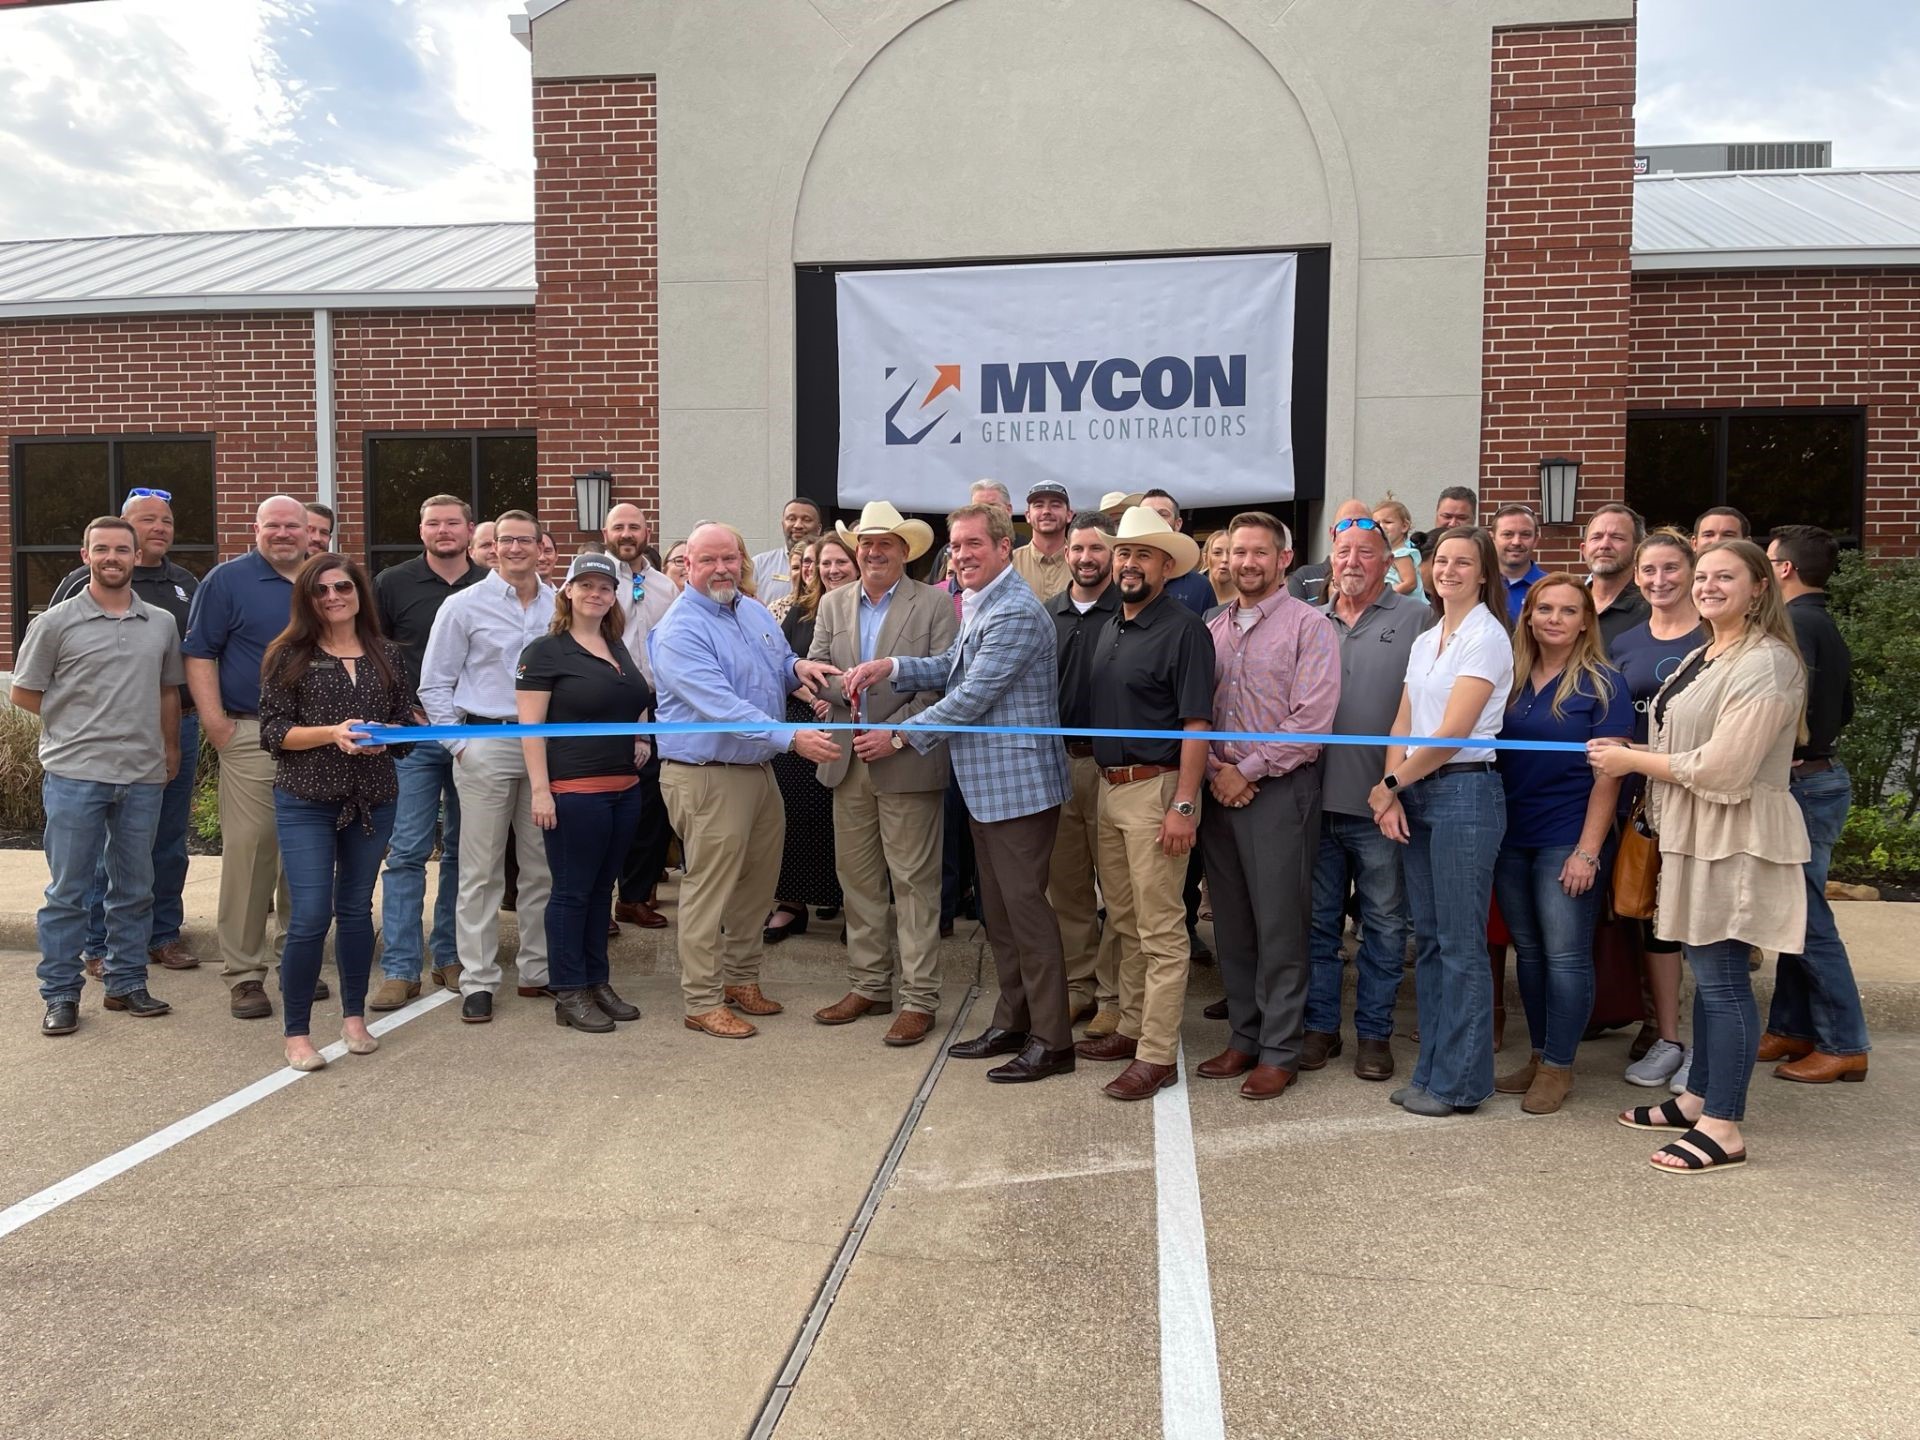 A group of people cutting a ribbon in front of a building.